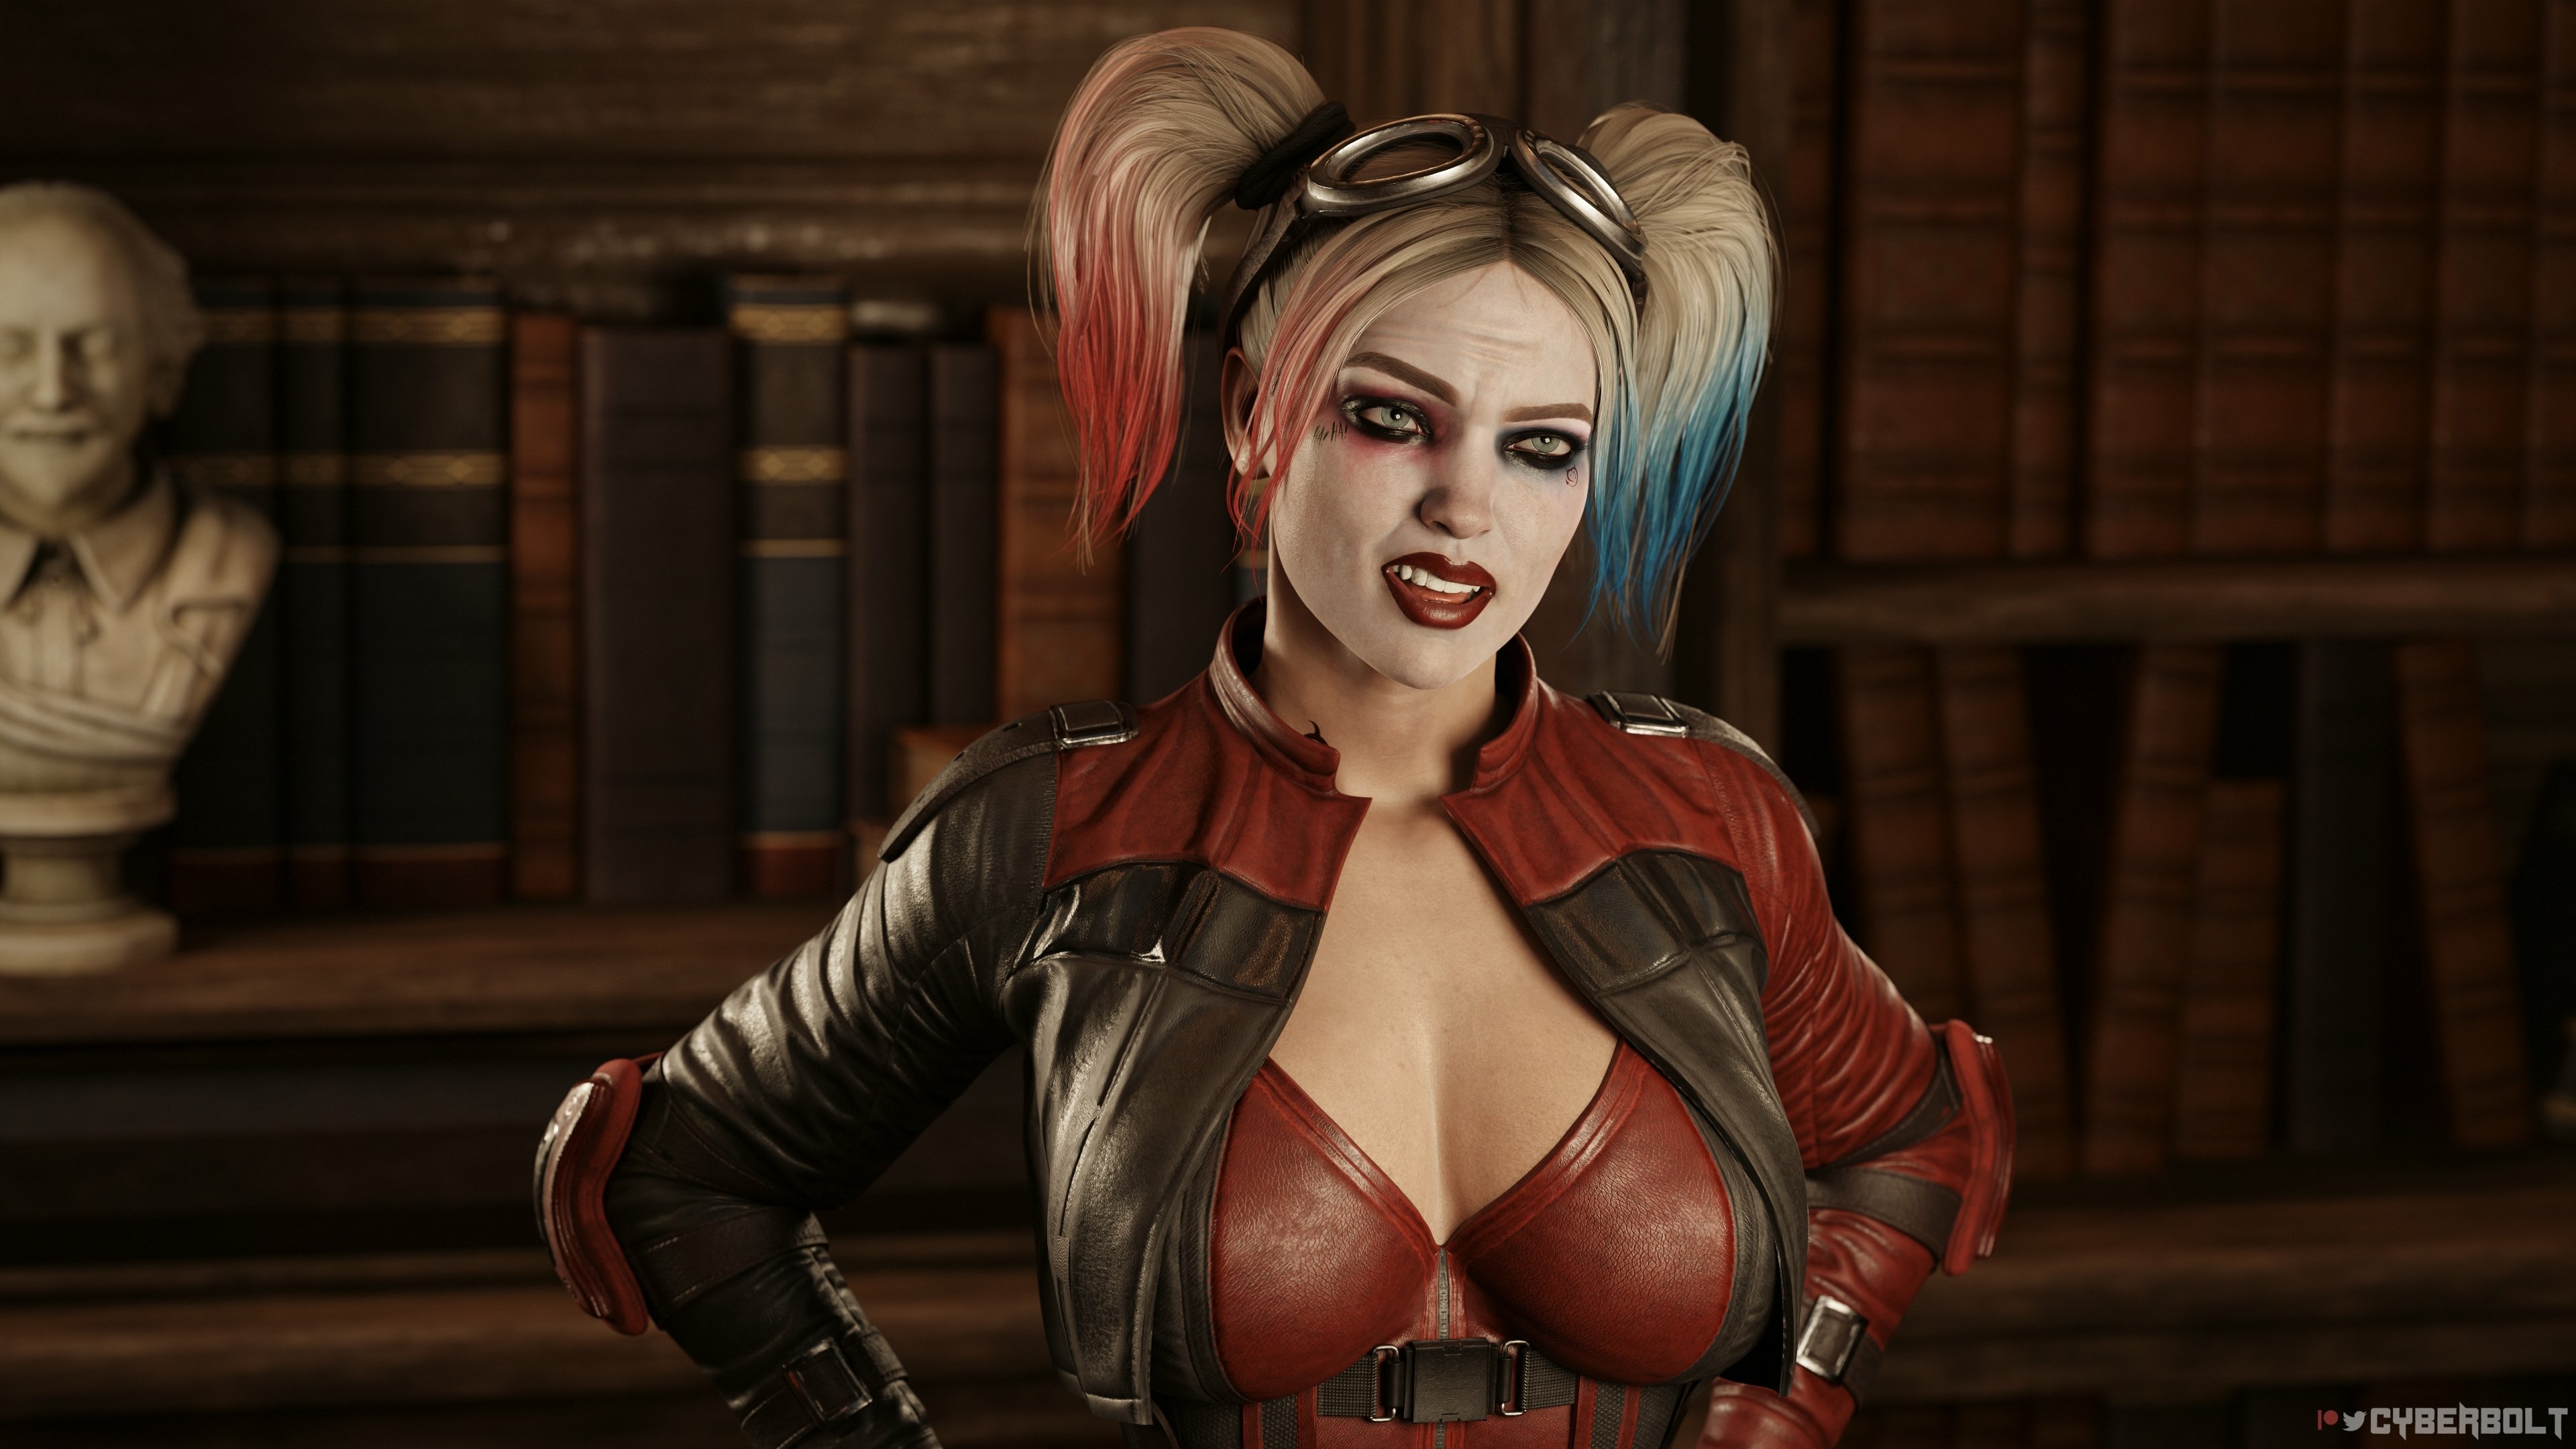 4 𝑭𝒂𝒄𝒆𝒔... Harley Quinn Suicide Squad Lingerie Sexy Lingerie Boobs Big boobs Tits Ass Big Ass Cake Sexy Horny Face Horny 3d Porn 2